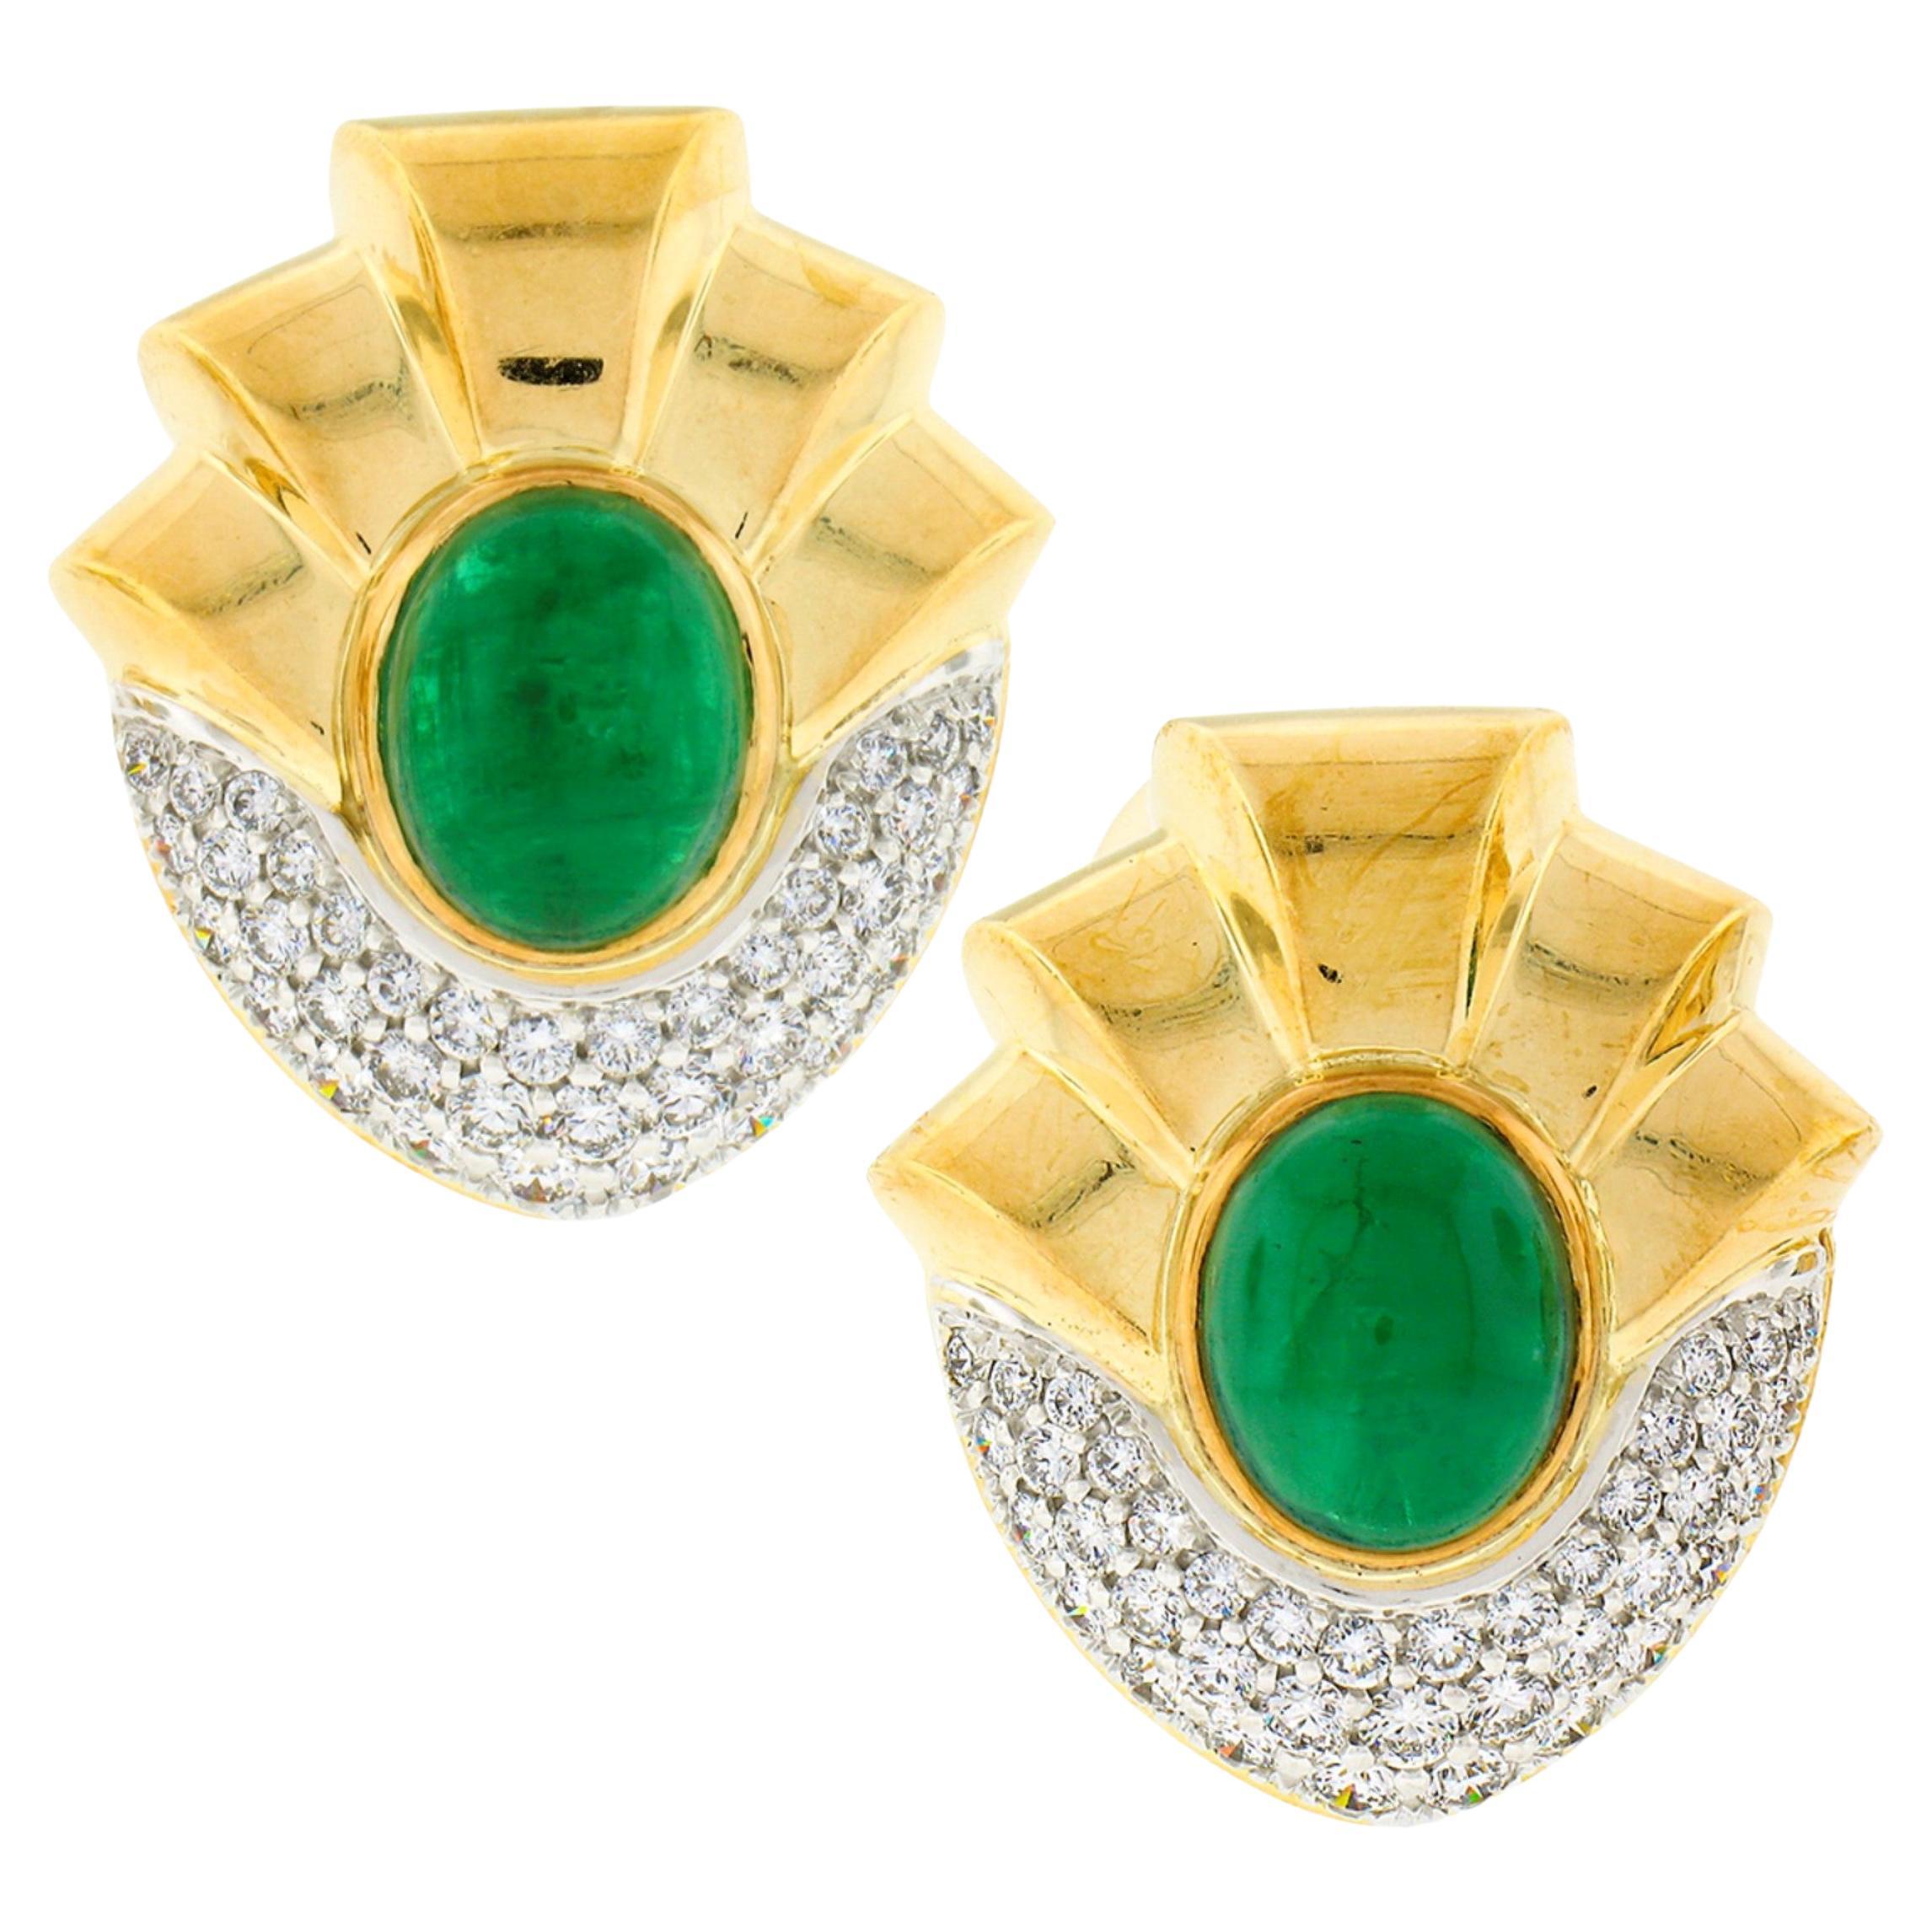 Vintage Large 18k Gold 11.3ct GIA Oval Cabochon Emerald Diamond Clip on Earrings